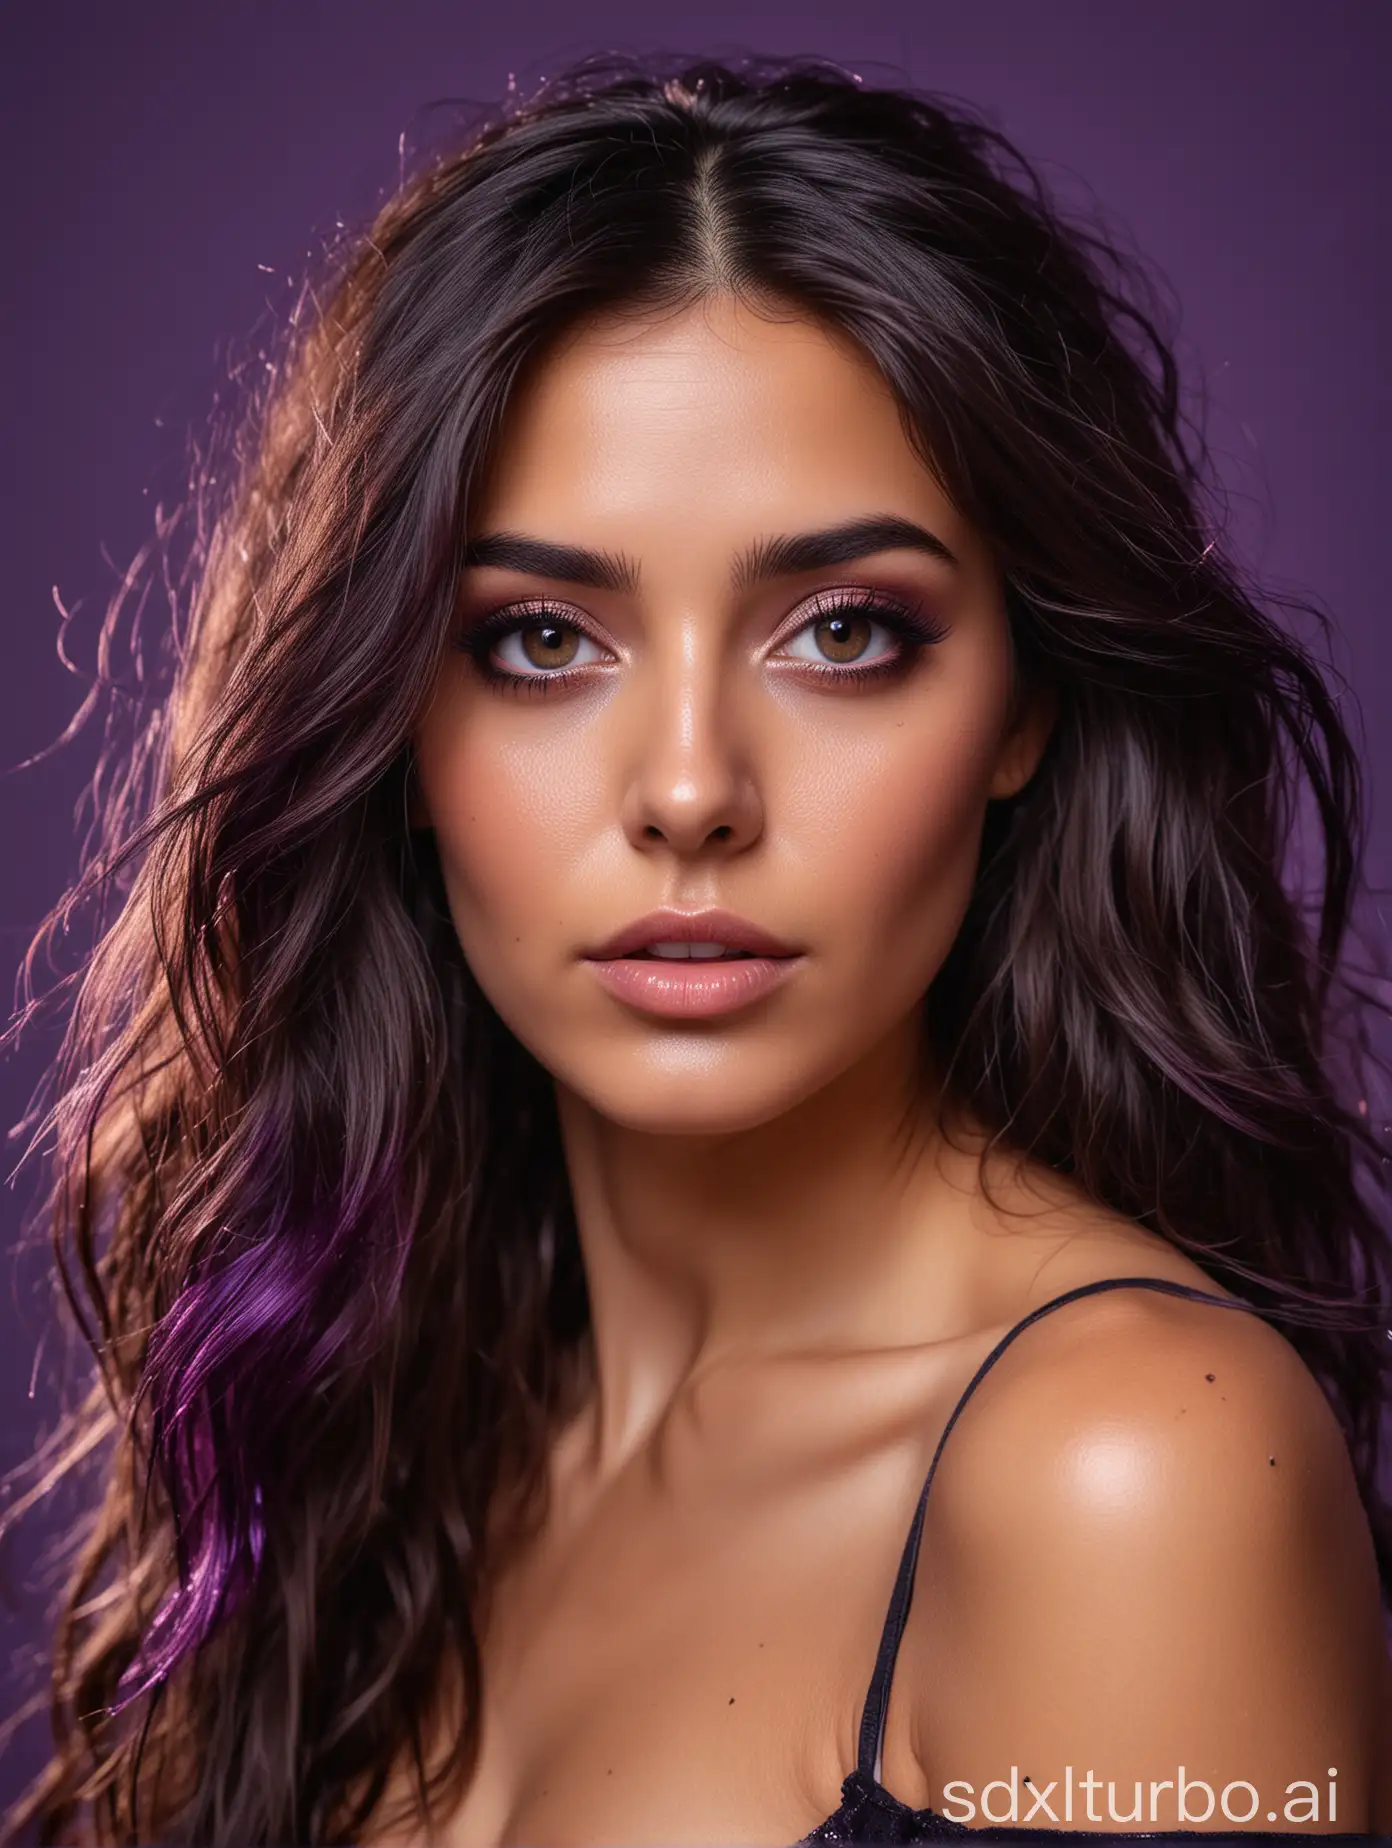 30-year-old woman, dressed in a cultured and modern way, sexy, long and loose brown eyes and hair, with an empowered look, purple background with black and drops of light slightly reminiscent of a galaxy